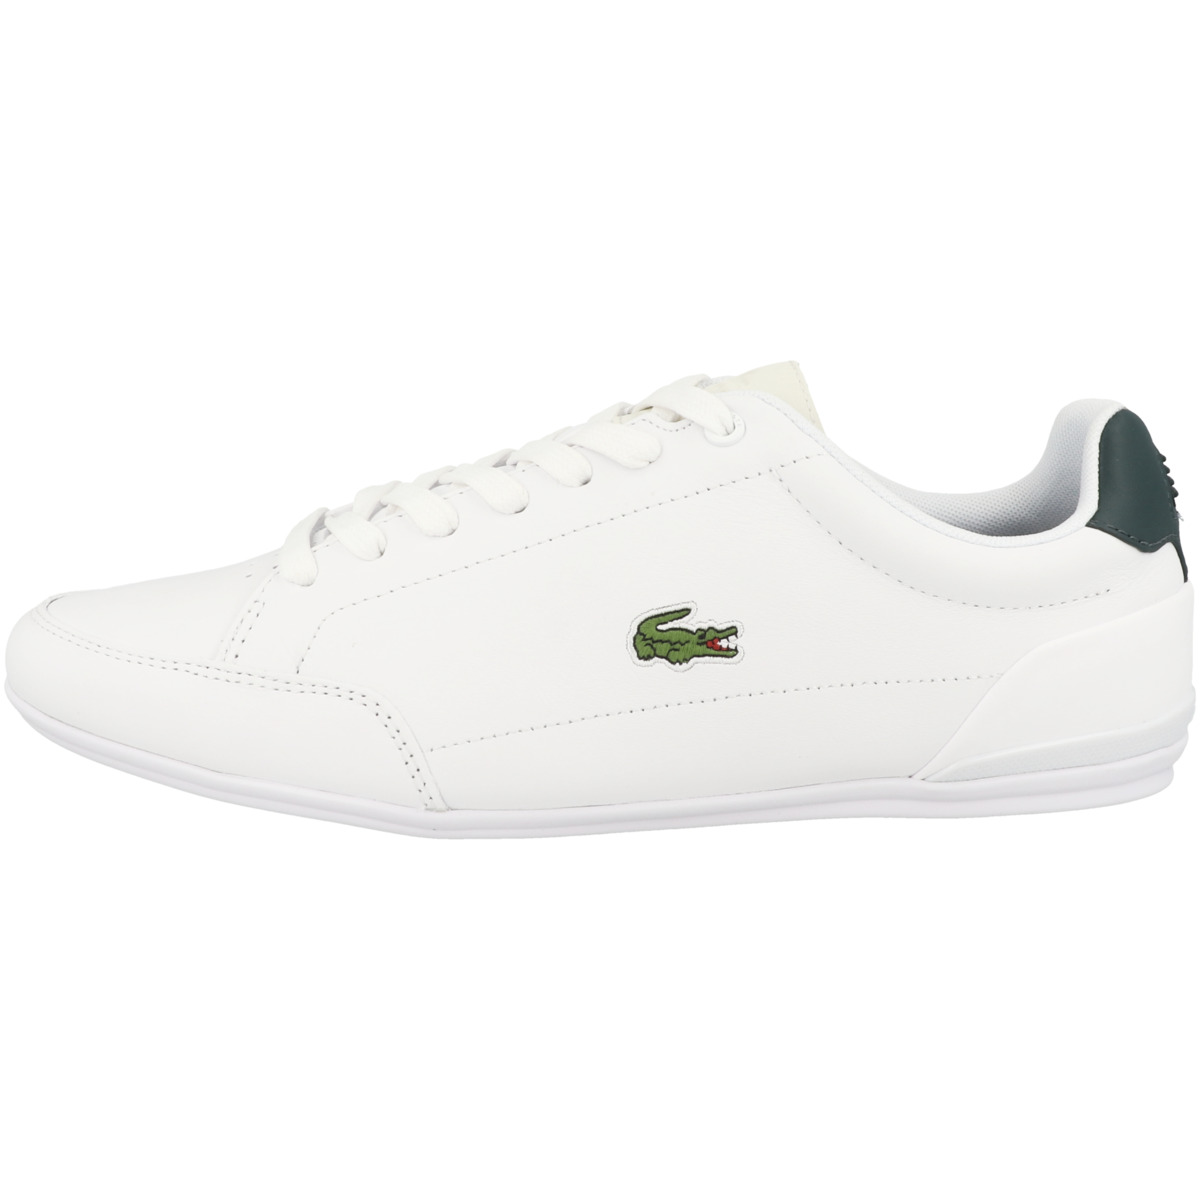 Lacoste Chaymon Crafted 0722 1 Sneaker low